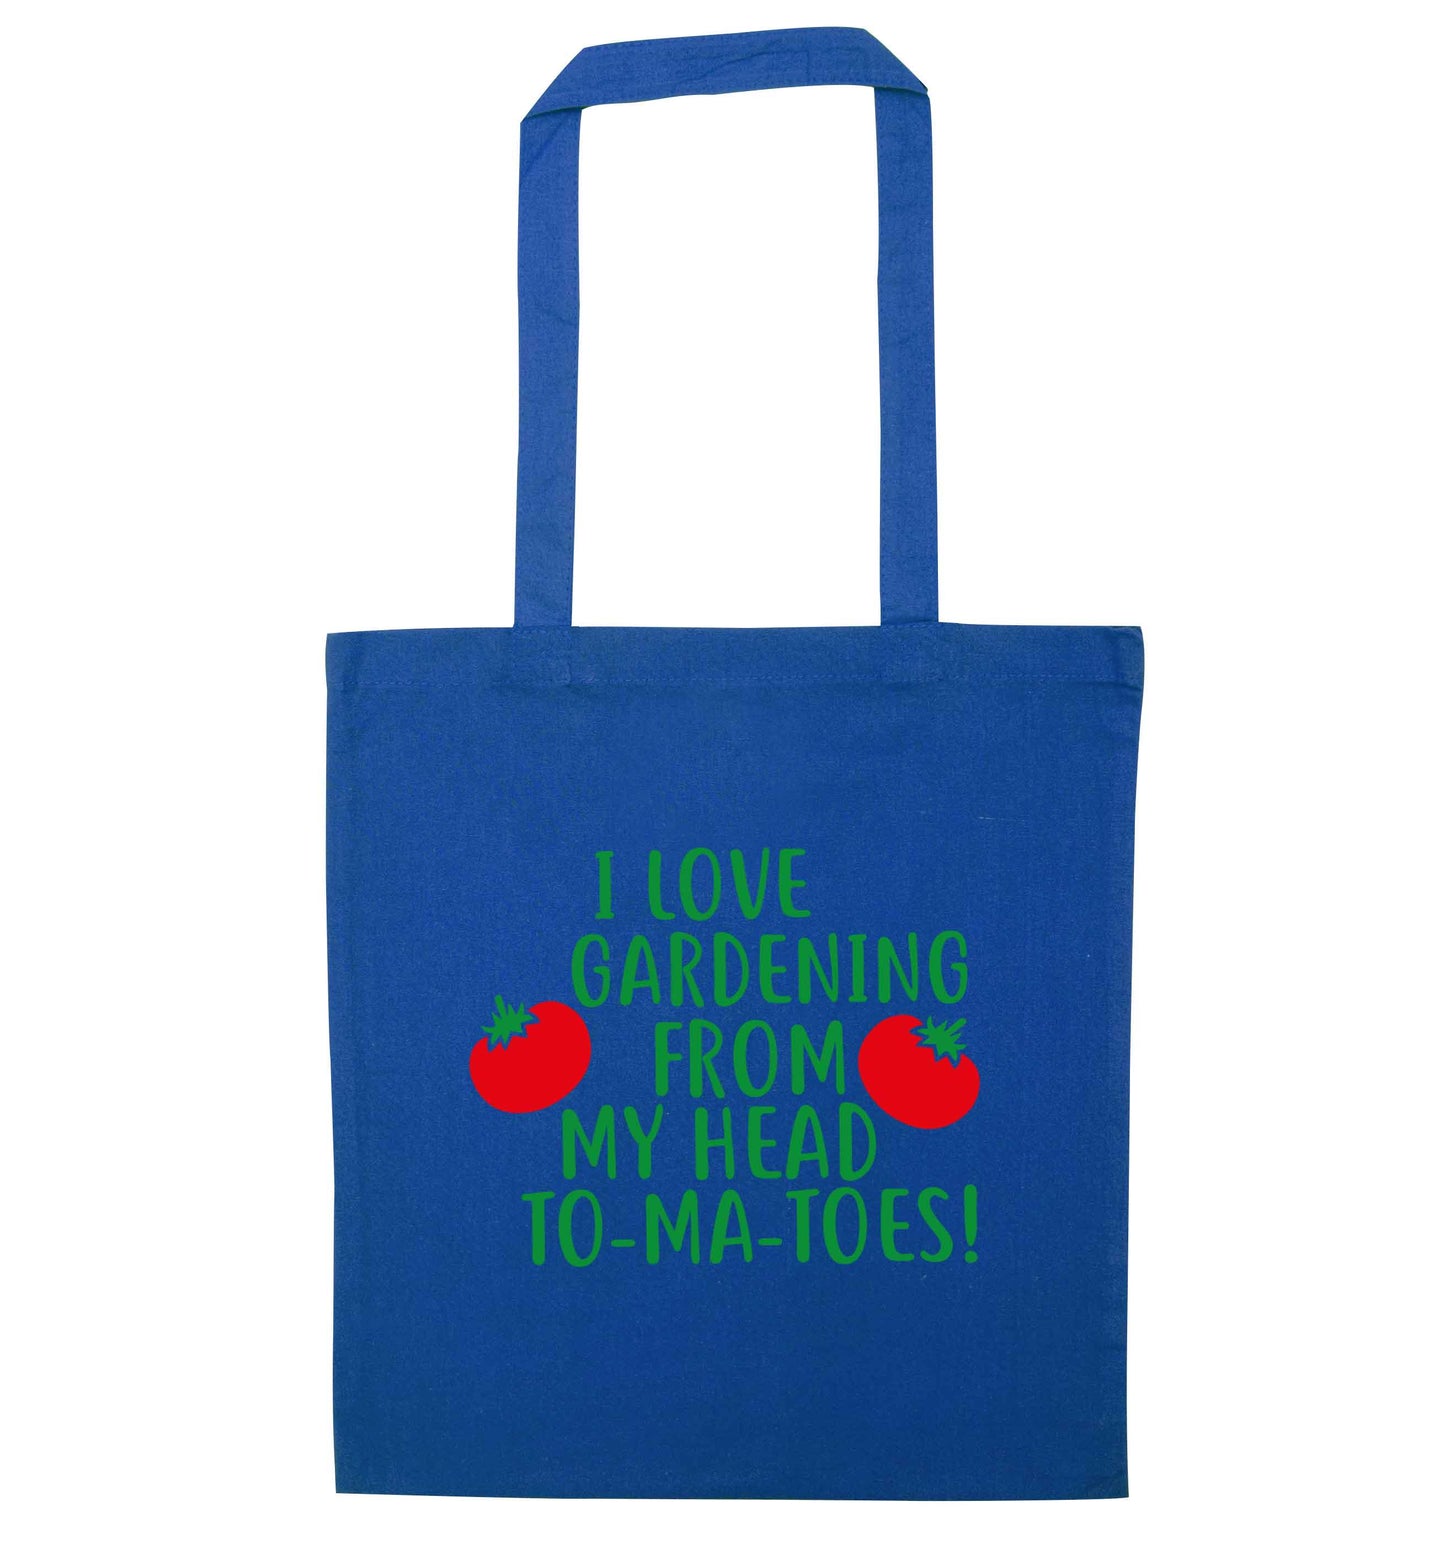 I love gardening from my head to-ma-toes blue tote bag